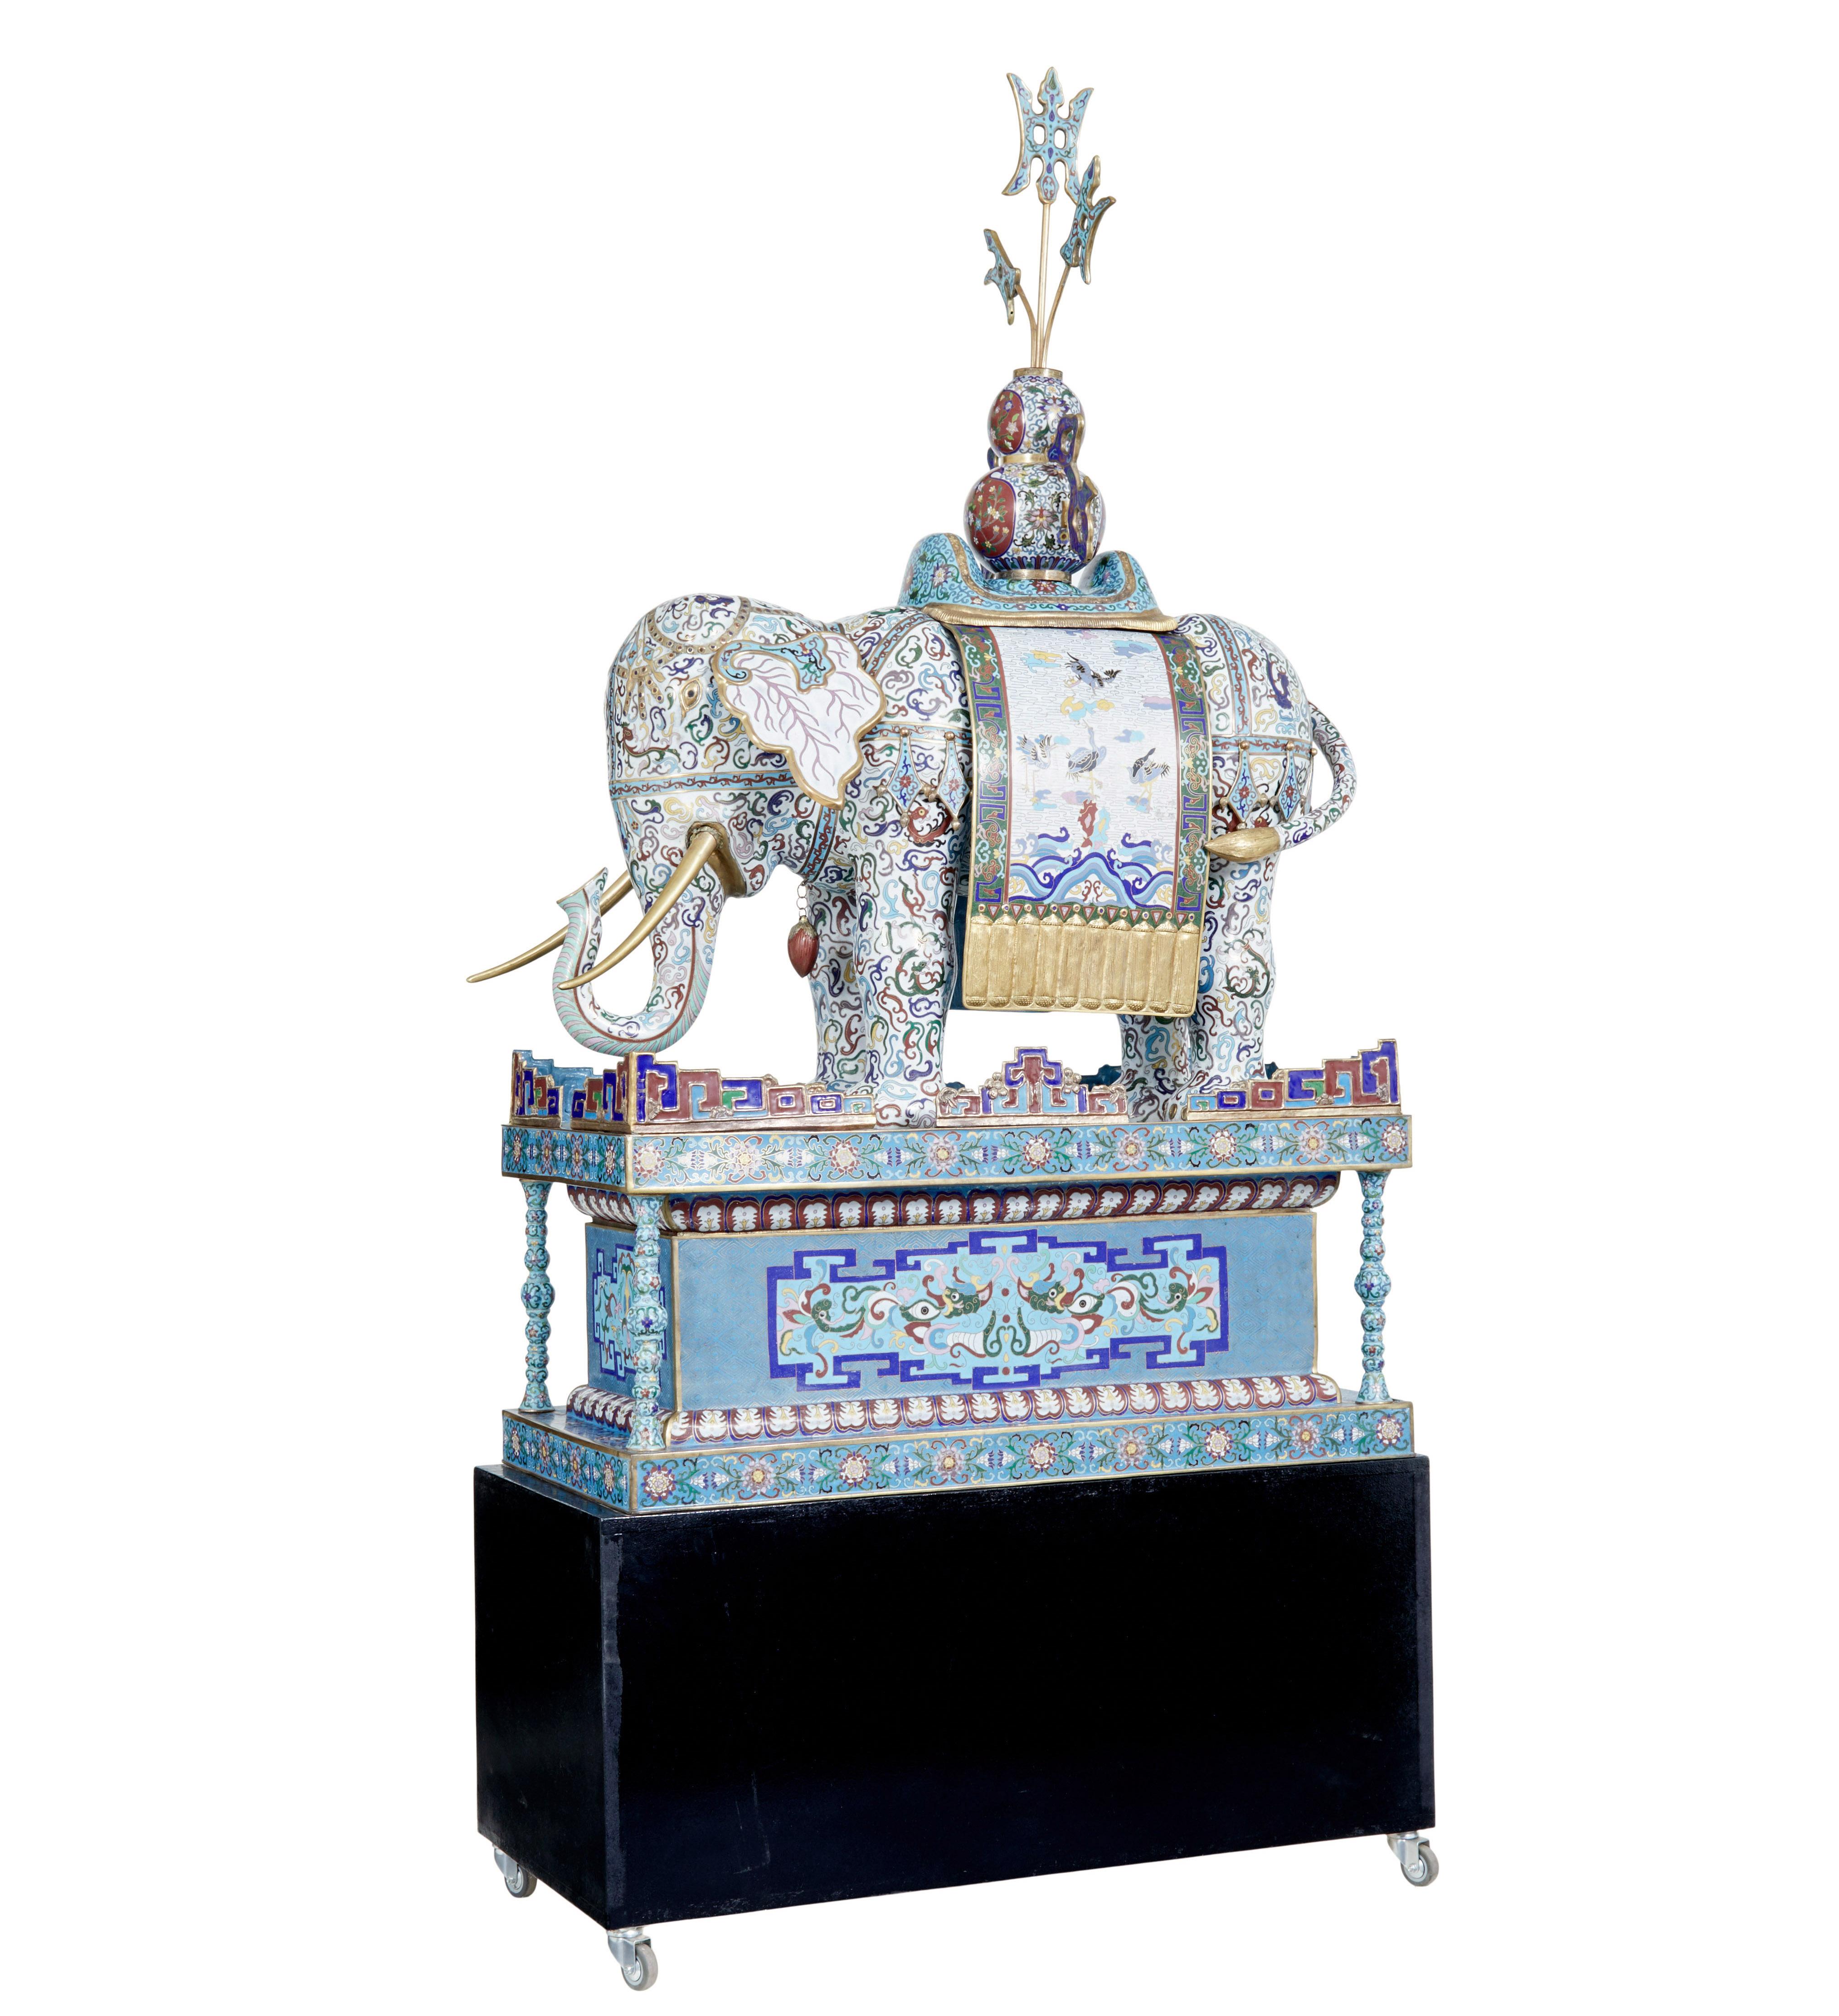 Early 20th century large chinese cloisonne enamel elephant on stand circa 1900.

A real rare decorative piece.

Profusely enamelled, modelled carrying a saddle and flaming finial.  Inlaid all over with scrolls and bands, seated on a shaped base with